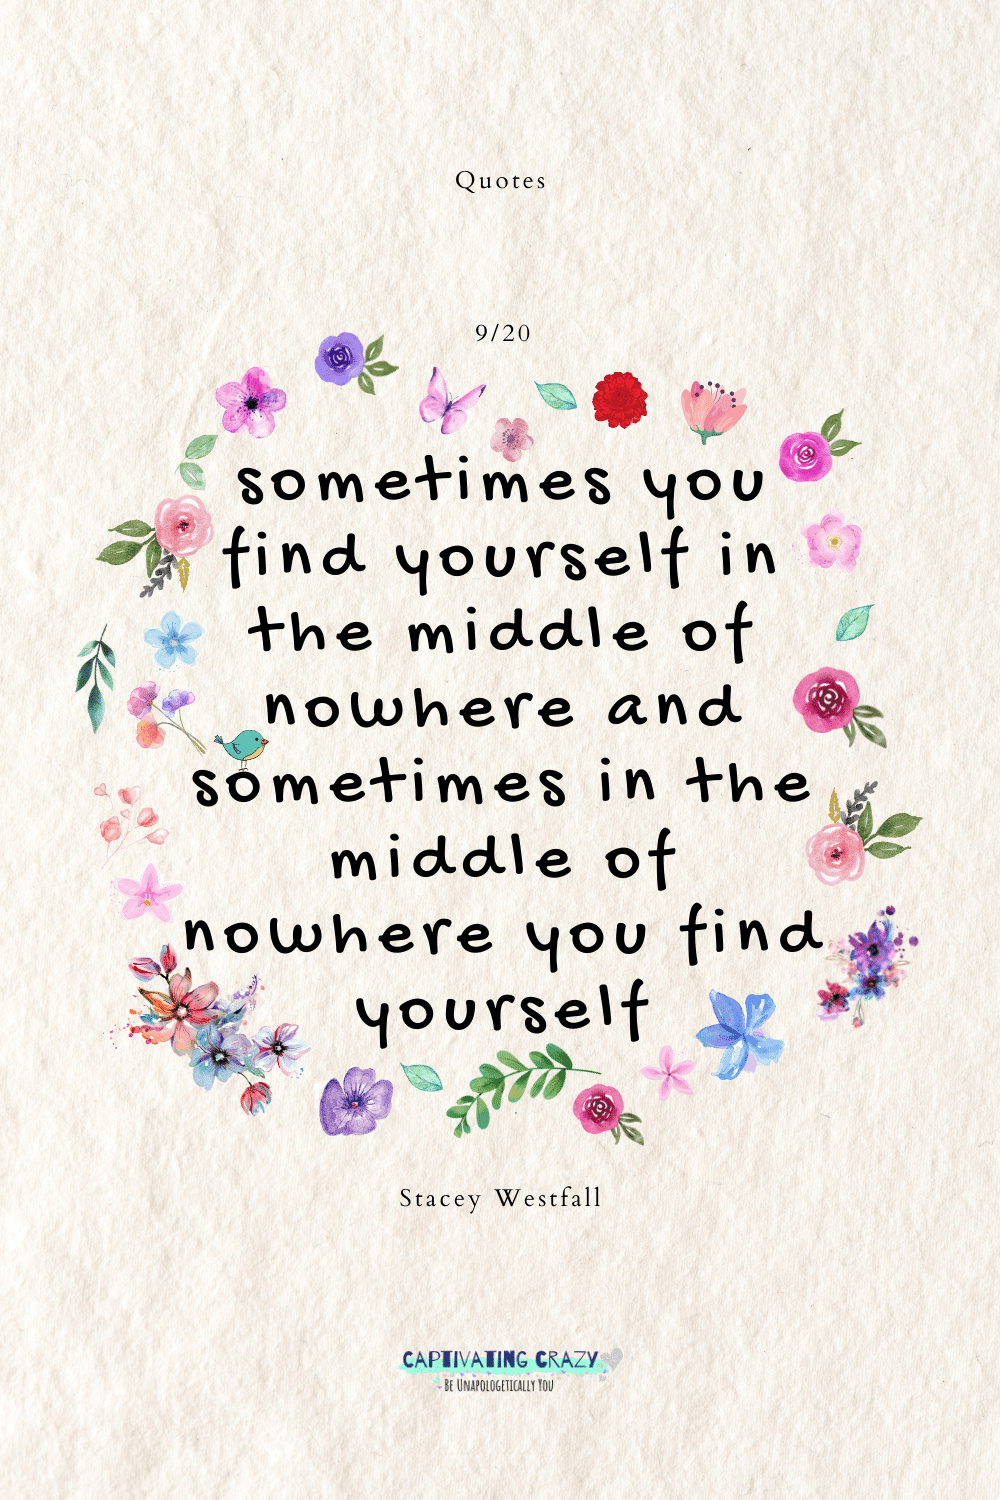 Sometimes you find yourself in the middle of nowhere and sometimes in the middle of nowhere you find yourself. Stacey Westfall